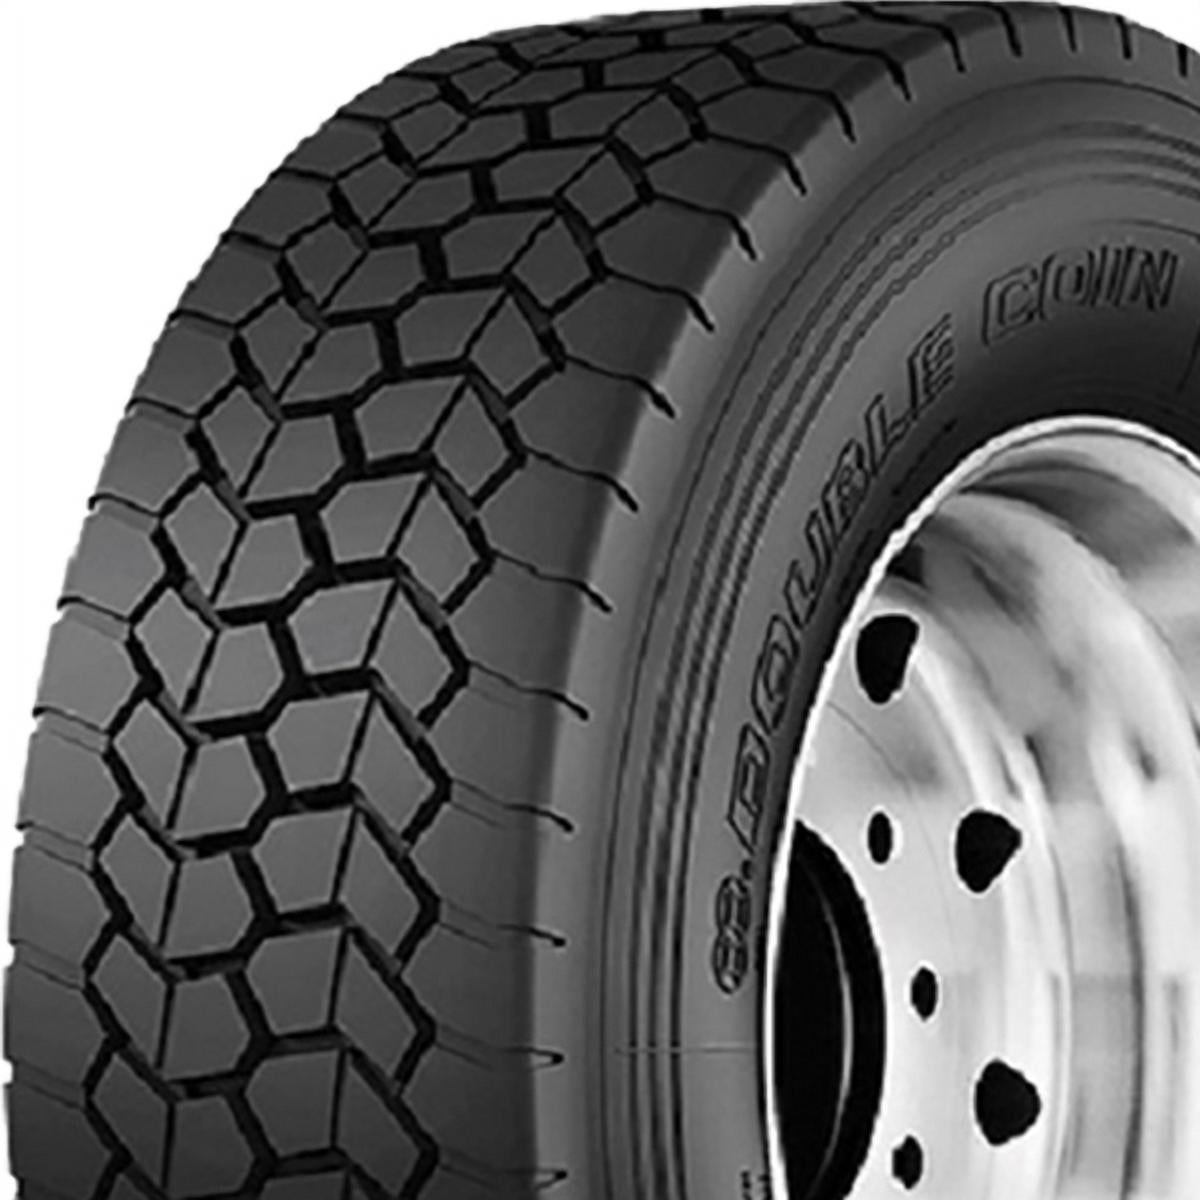 Double Coin RLB400 Closed Shoulder Drive-Position Commercial Radial Truck Tire 285/75R24.5 14 ply